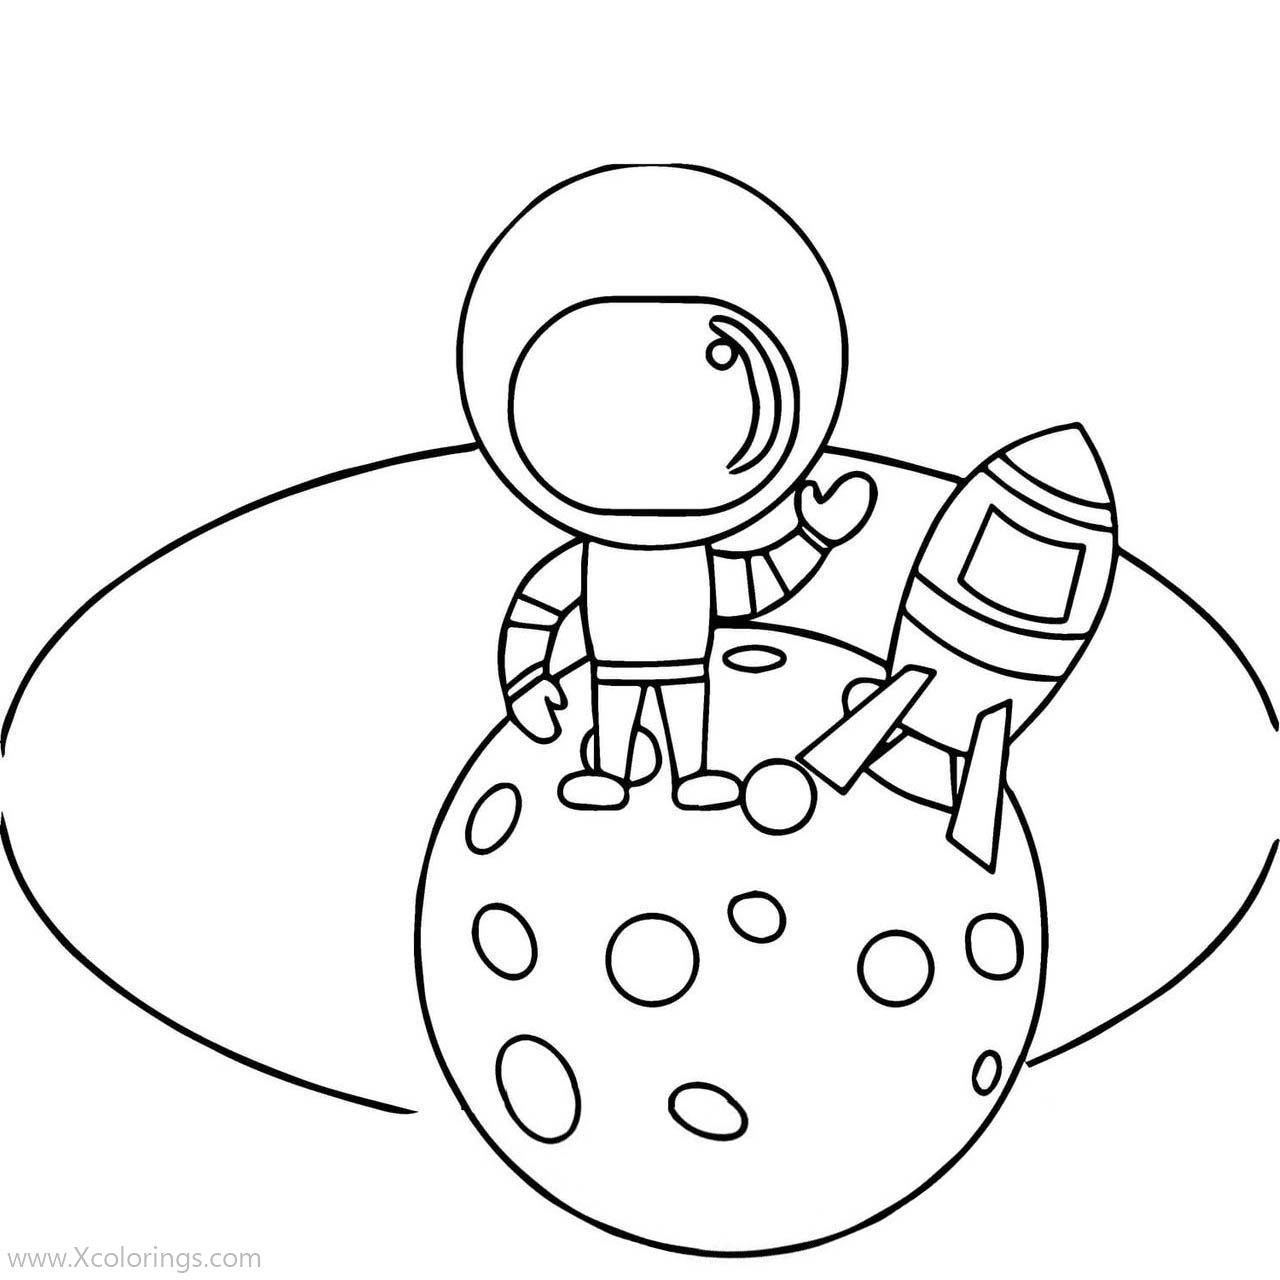 Free Easy Astronaut Coloring Pages for 6 Years Old Children printable